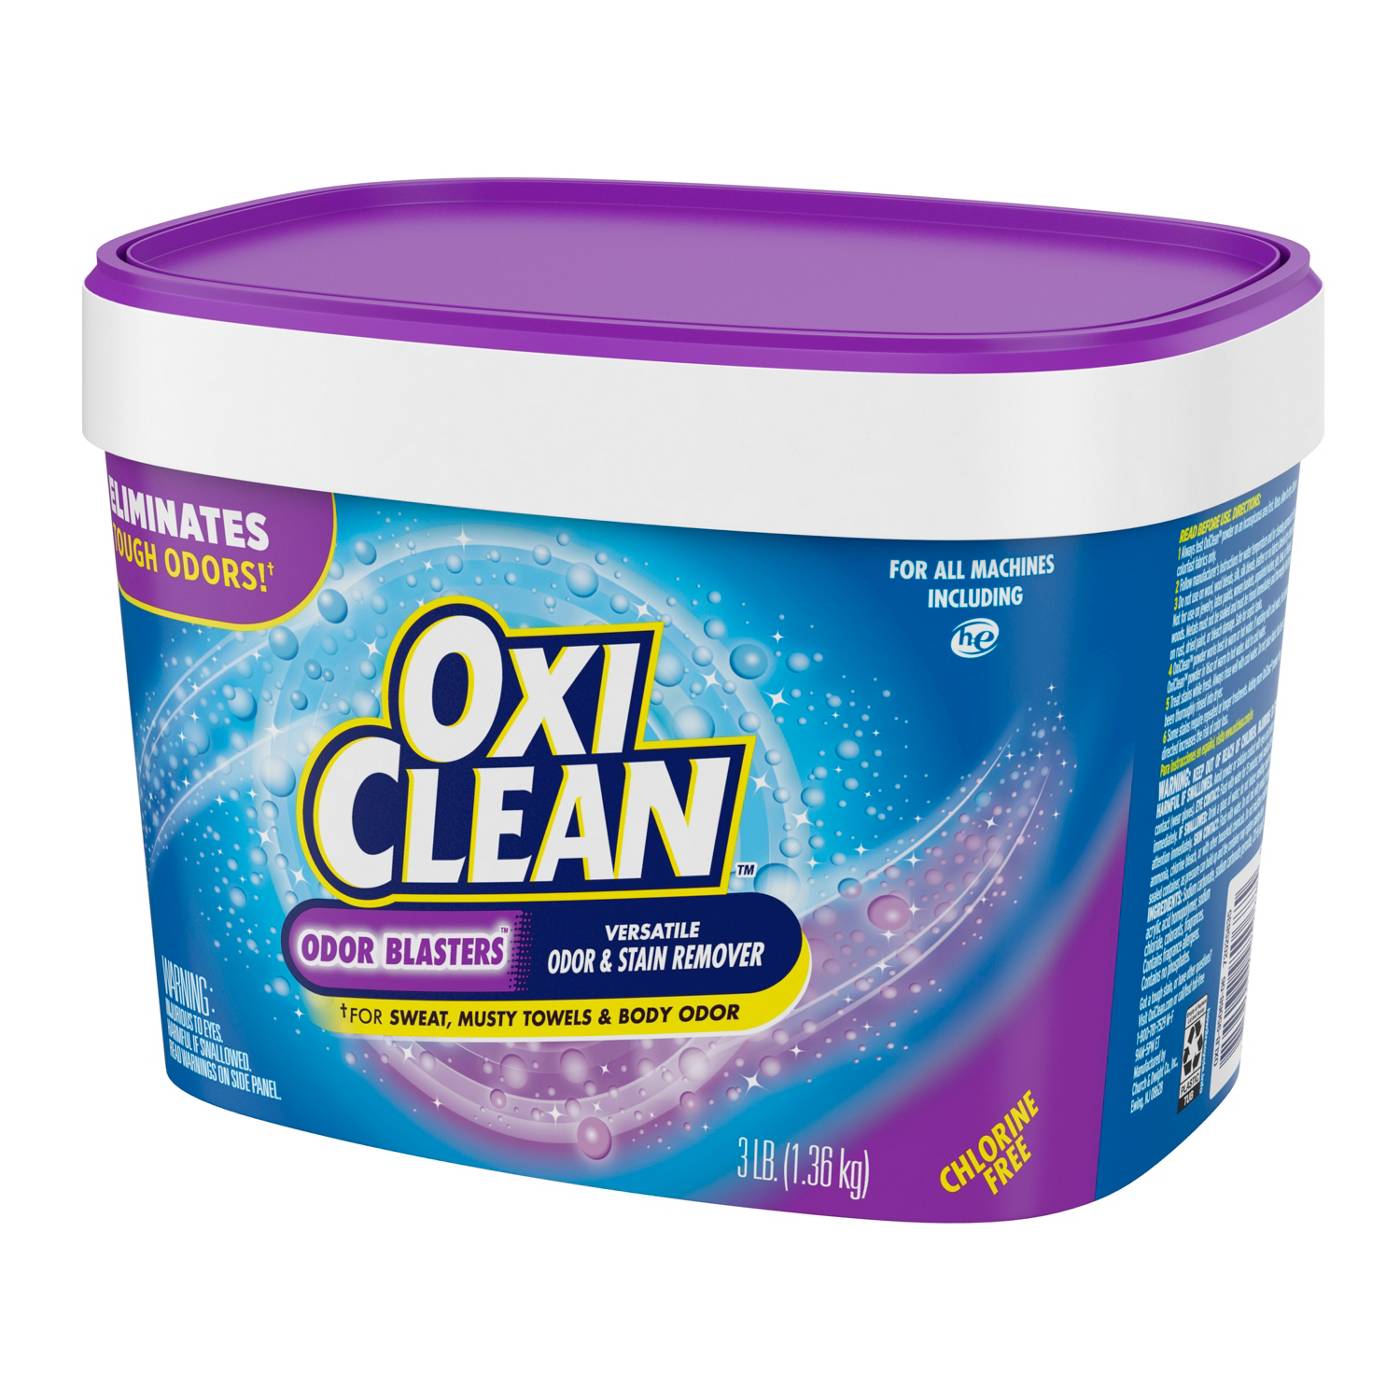 OxiClean Odor Blasters Laundry Stain & Odor Remover; image 4 of 4